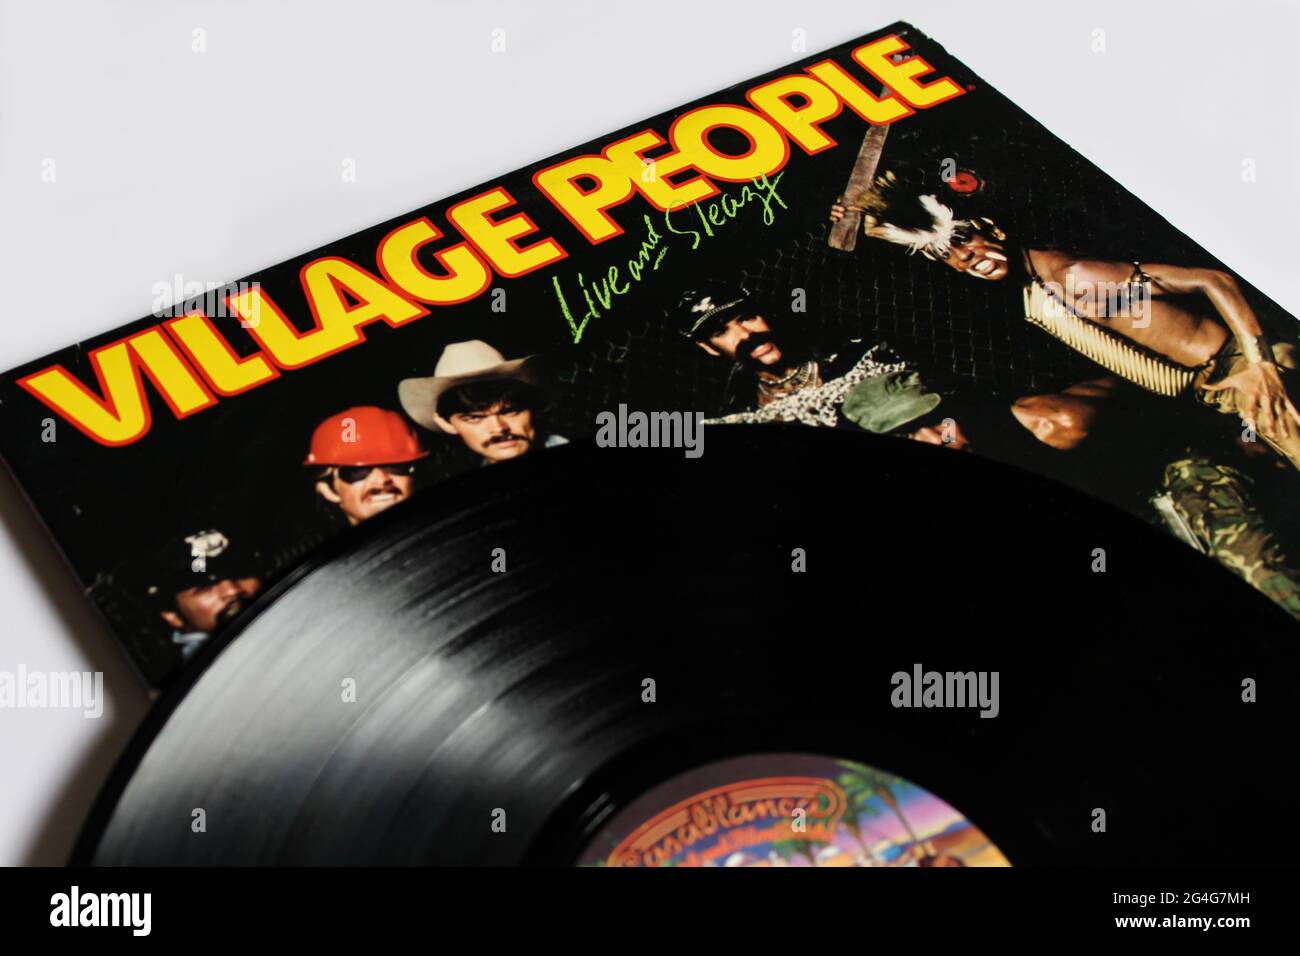 Disco, funk, and soul band, the Village People music album on vinyl record LP disc. Titled: Live and Sleazy album cover Stock Photo